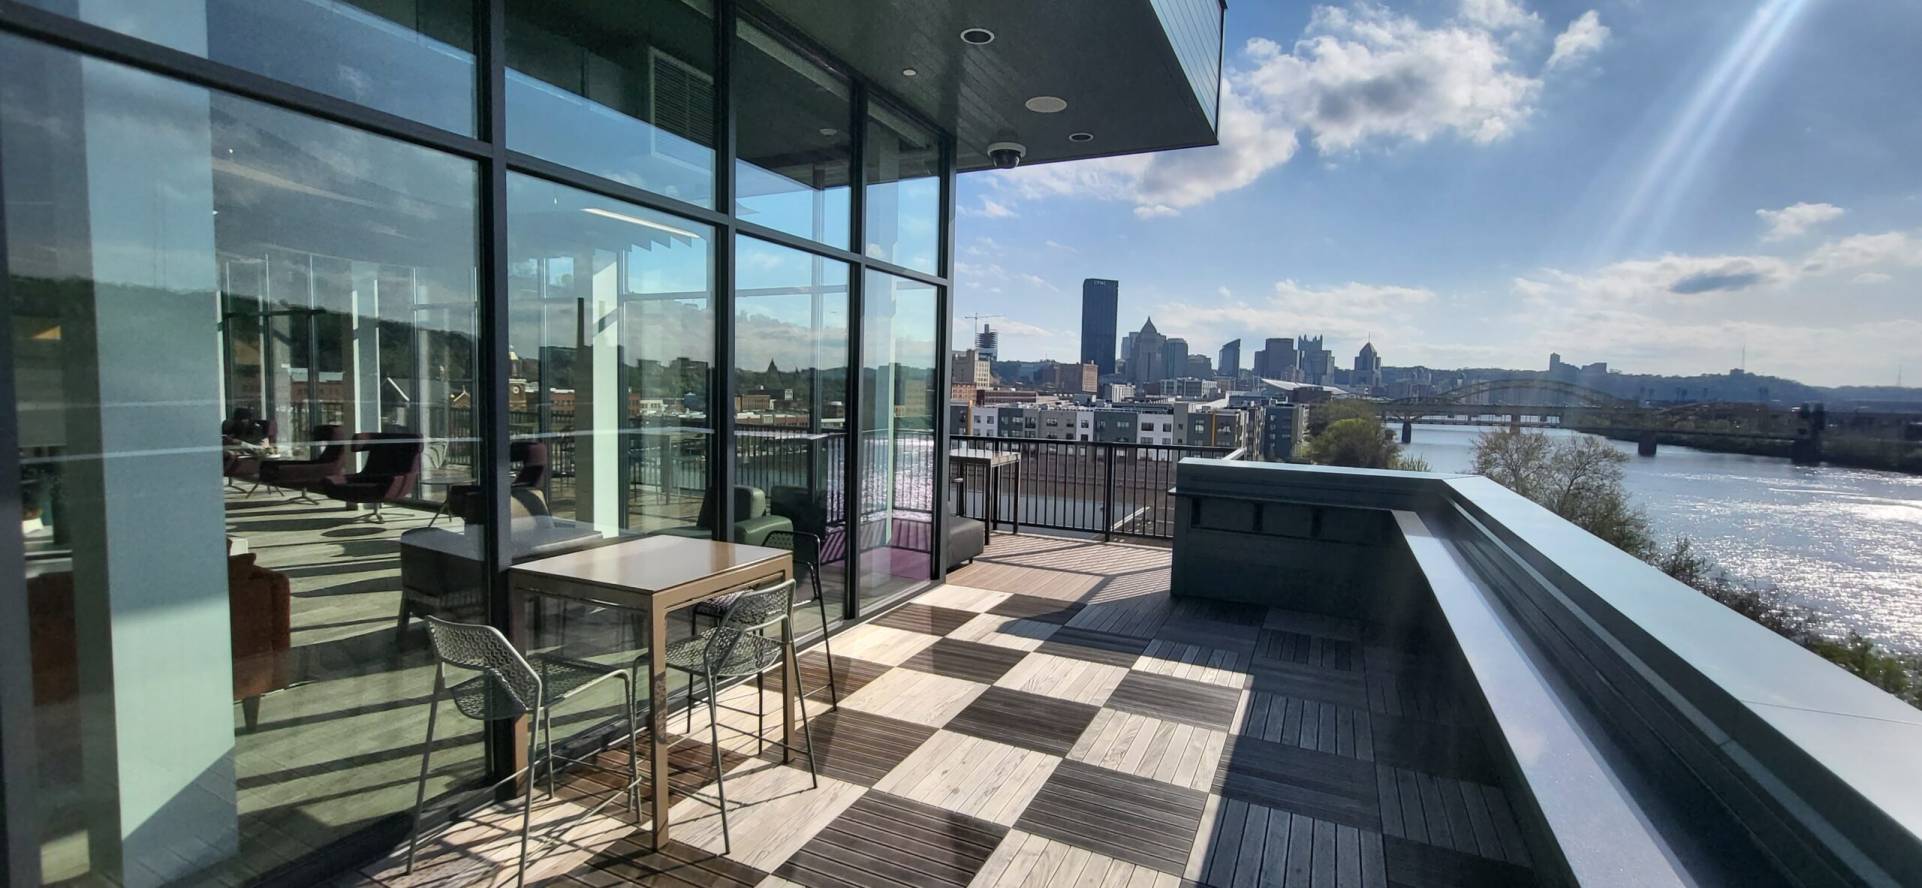 Club room deck with seating, tables, and a view of downtown Pittsburgh